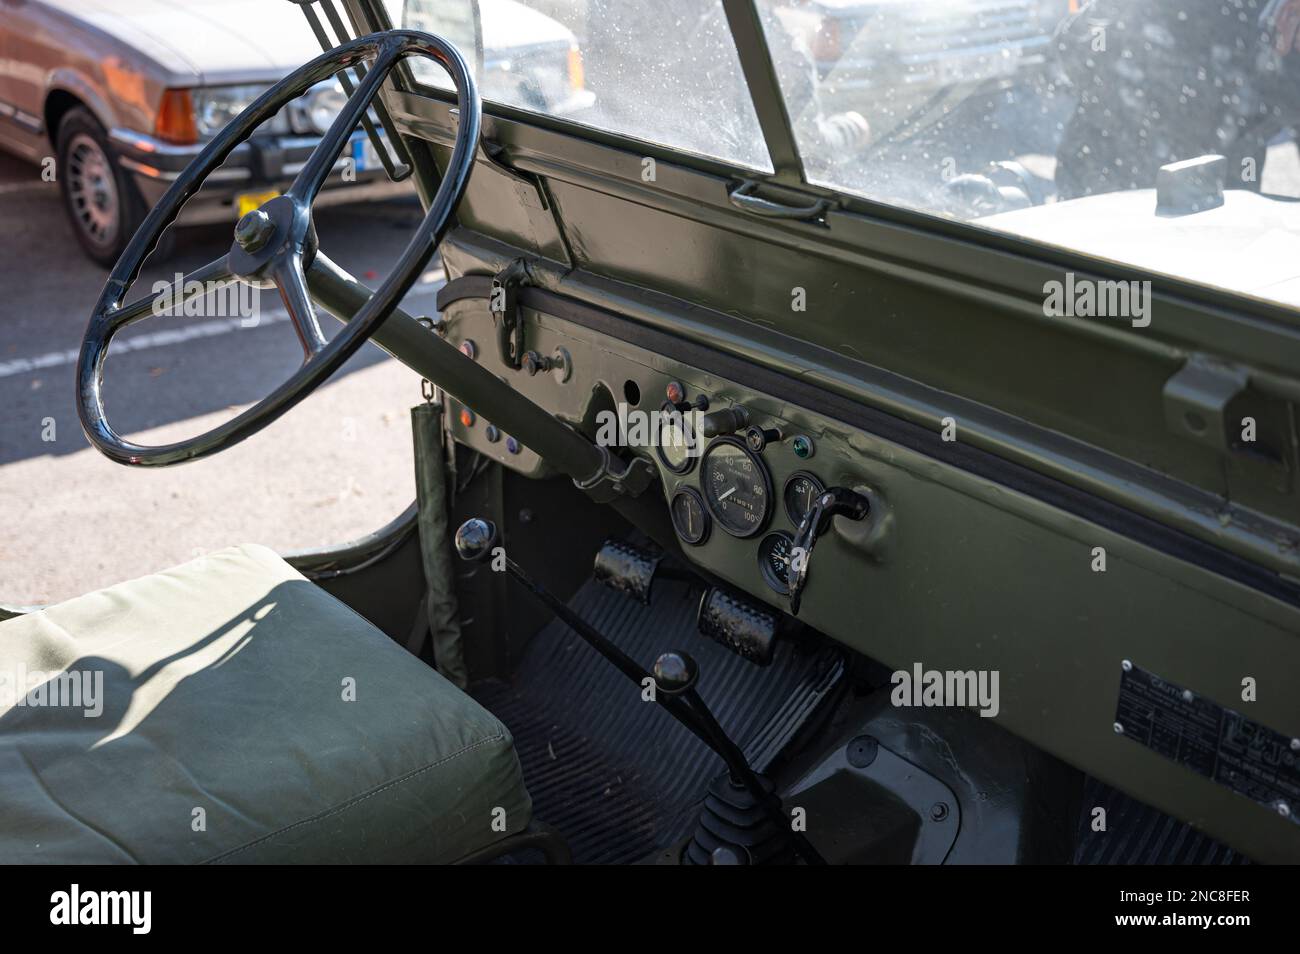 The steering wheel and controls of an old green Jeep Willys military SUV Stock Photo